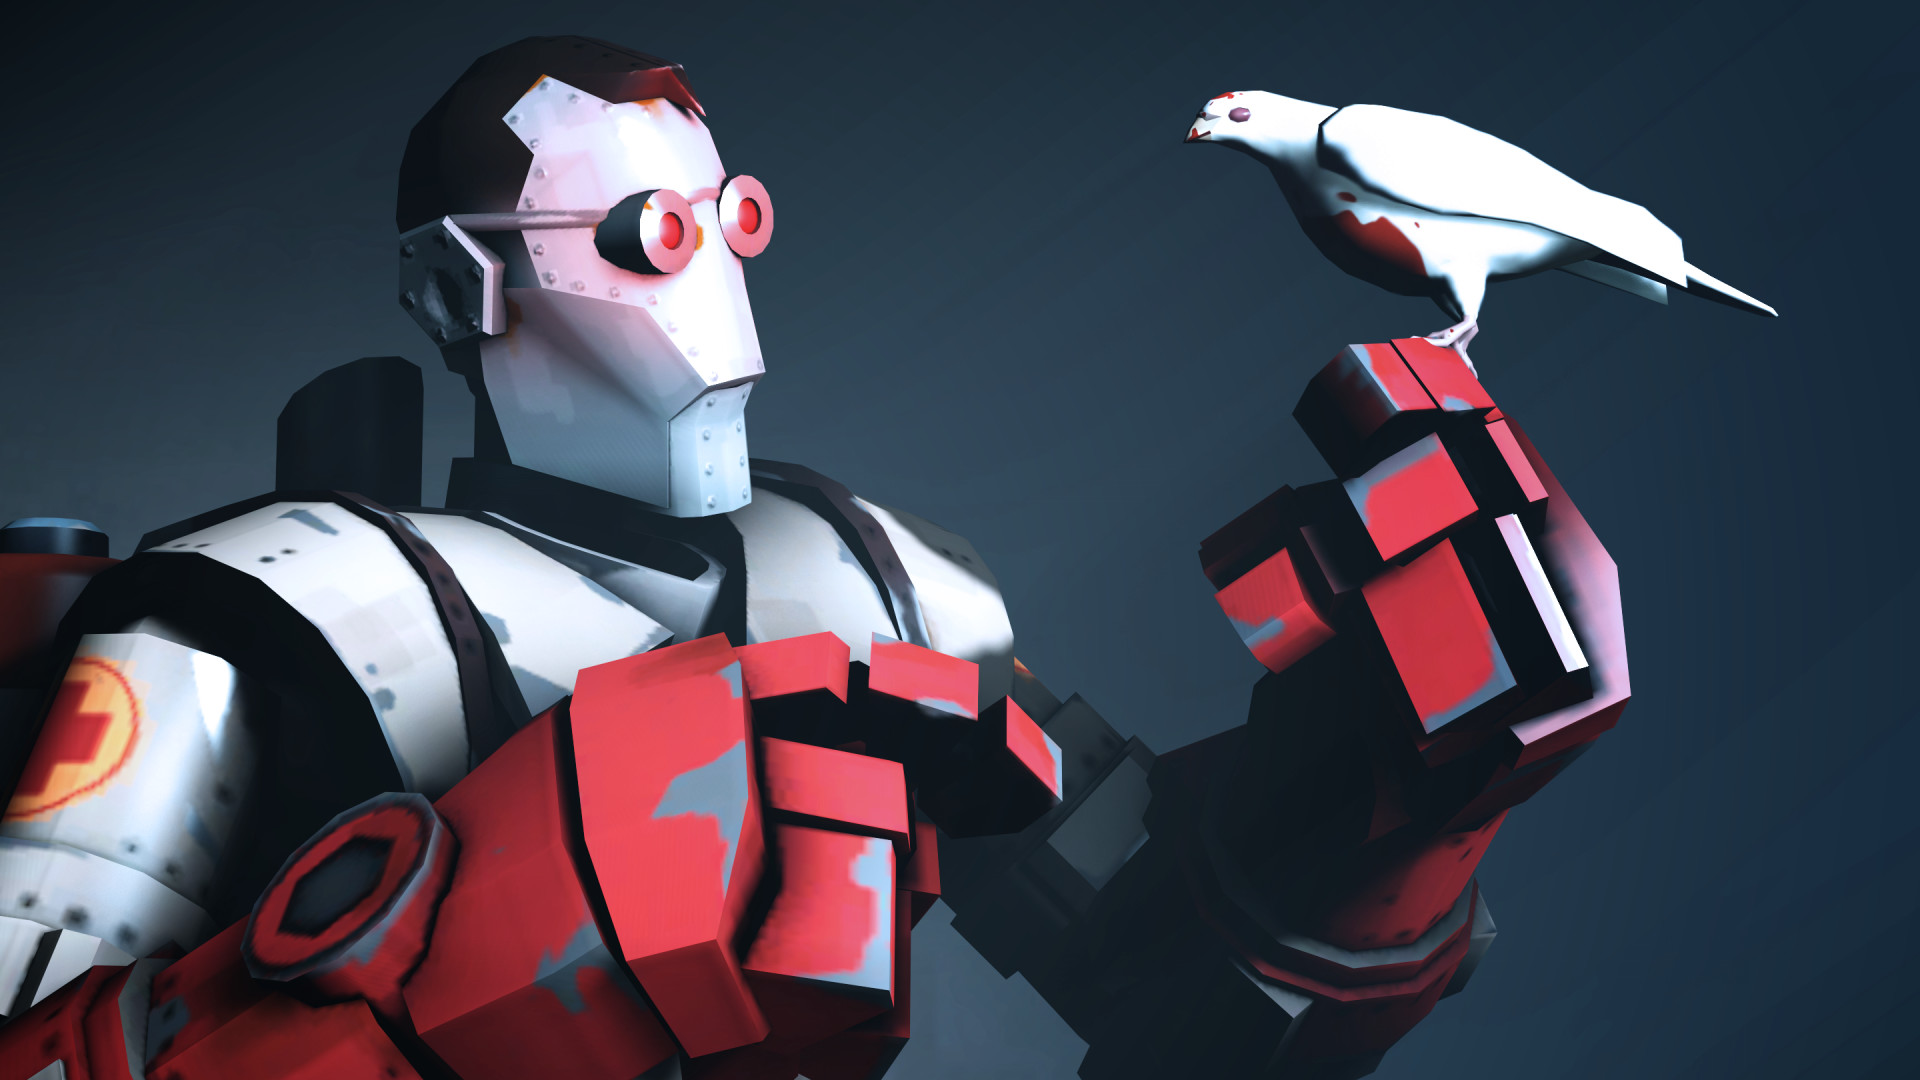 Team Fortress 2 Medic Wallpapers 67 Pictures - team fortress 2 medic wallpaper 3 roblox